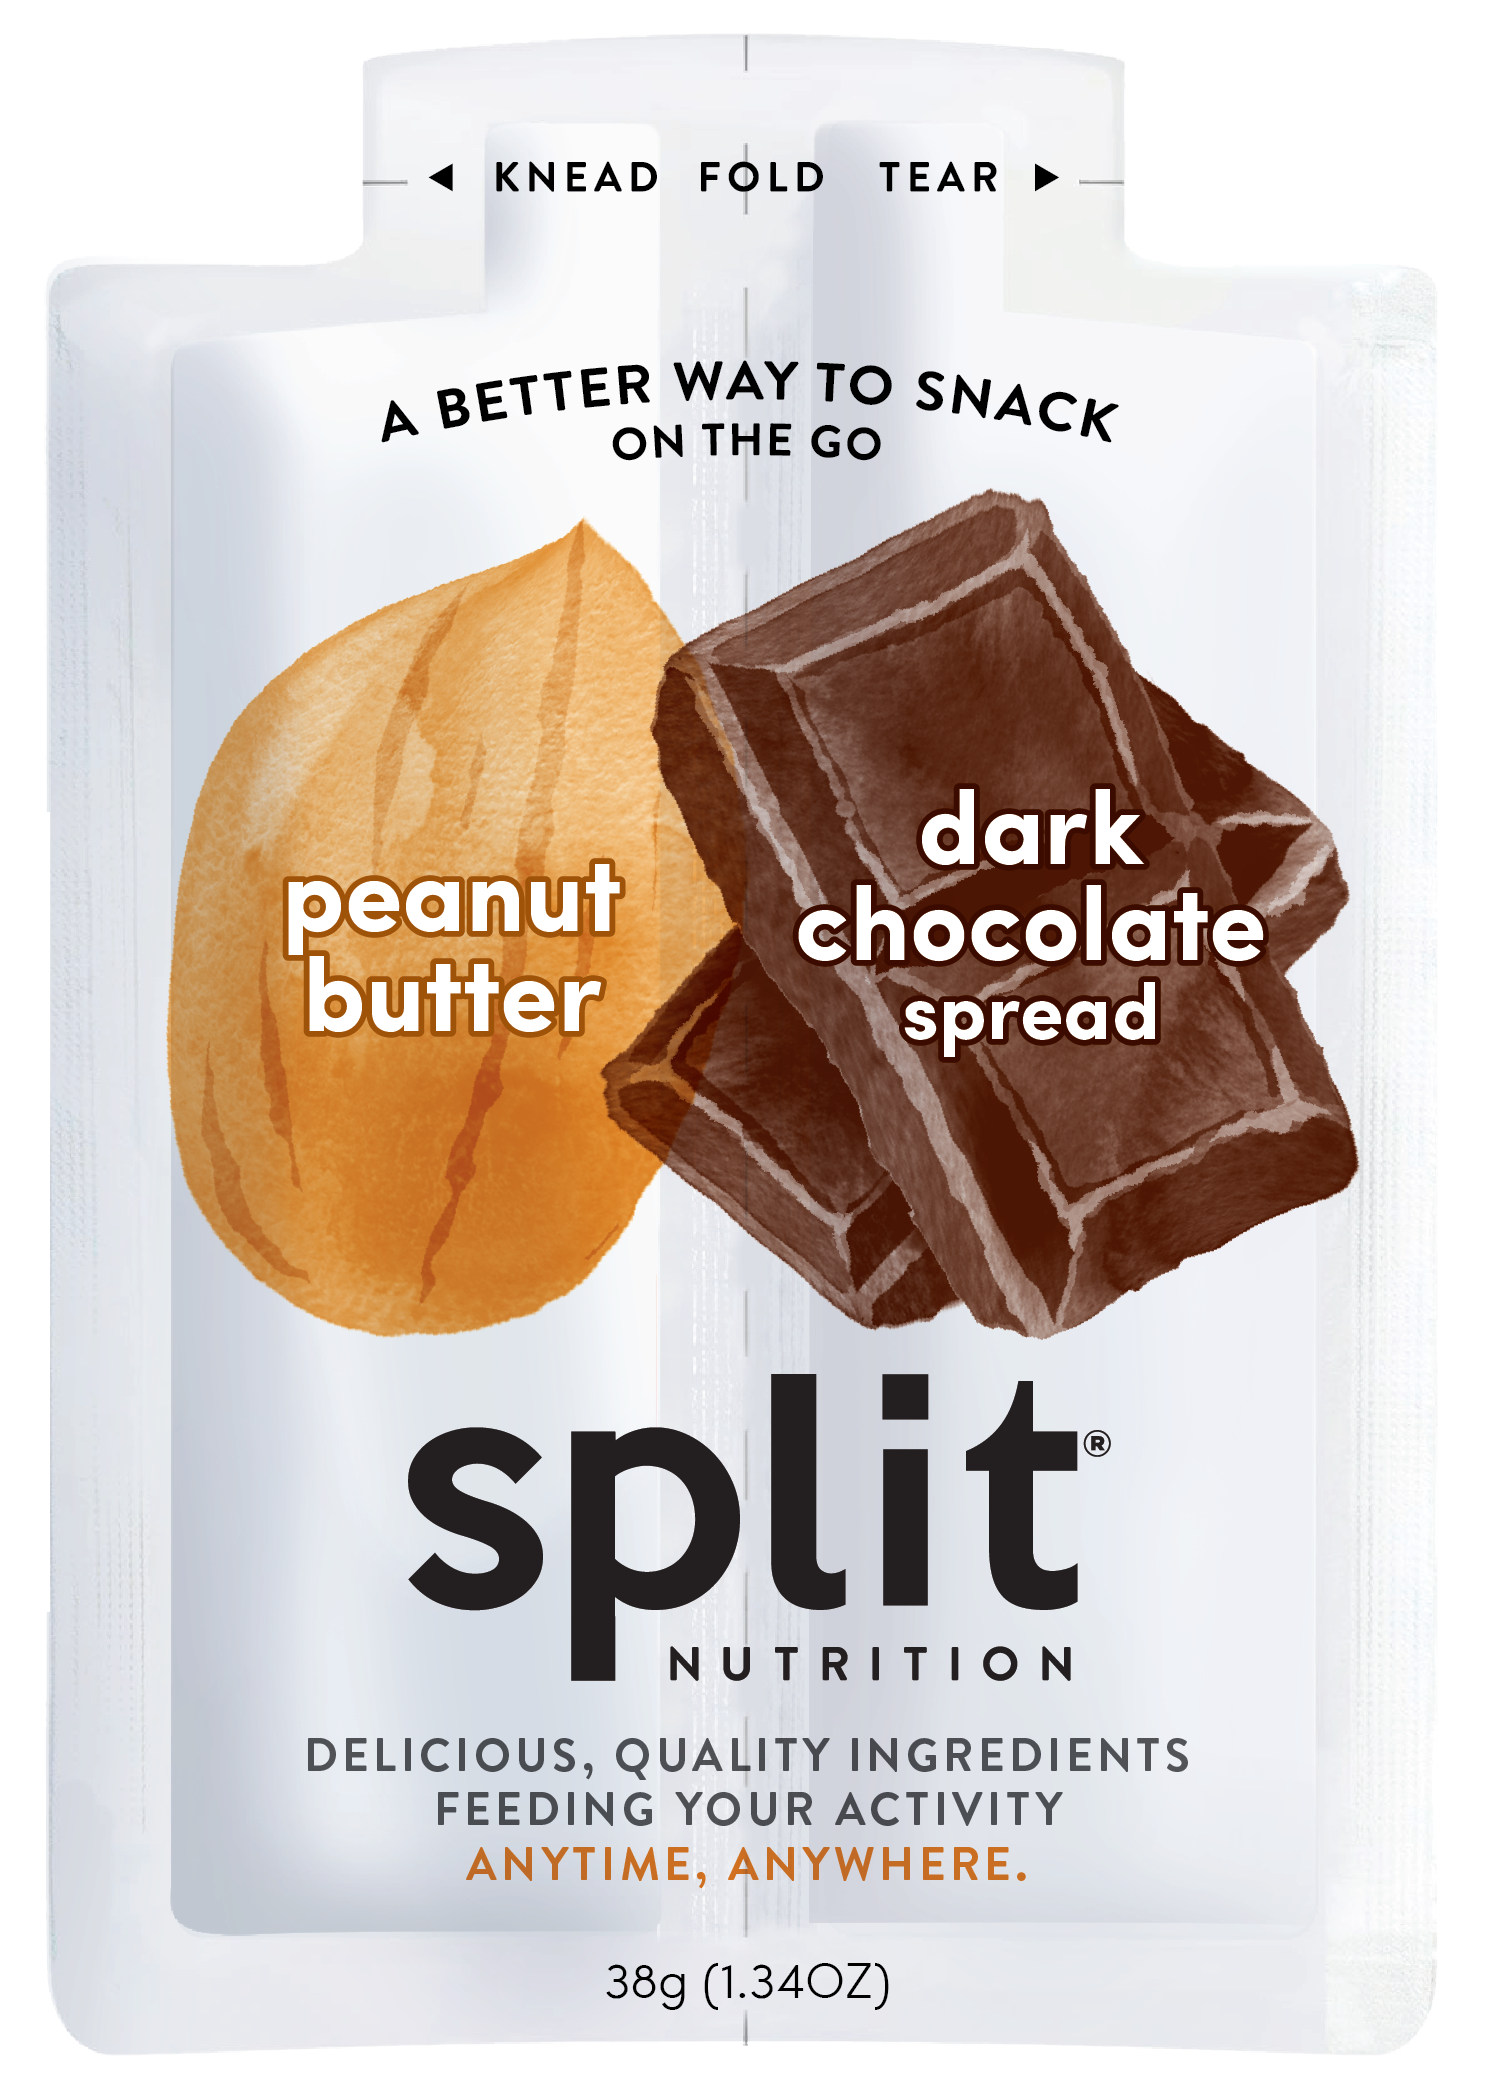 Split Nutrition Peanut Butter and Chocolate Spread (10ct box) 6 innerpacks per case 1.4 oz